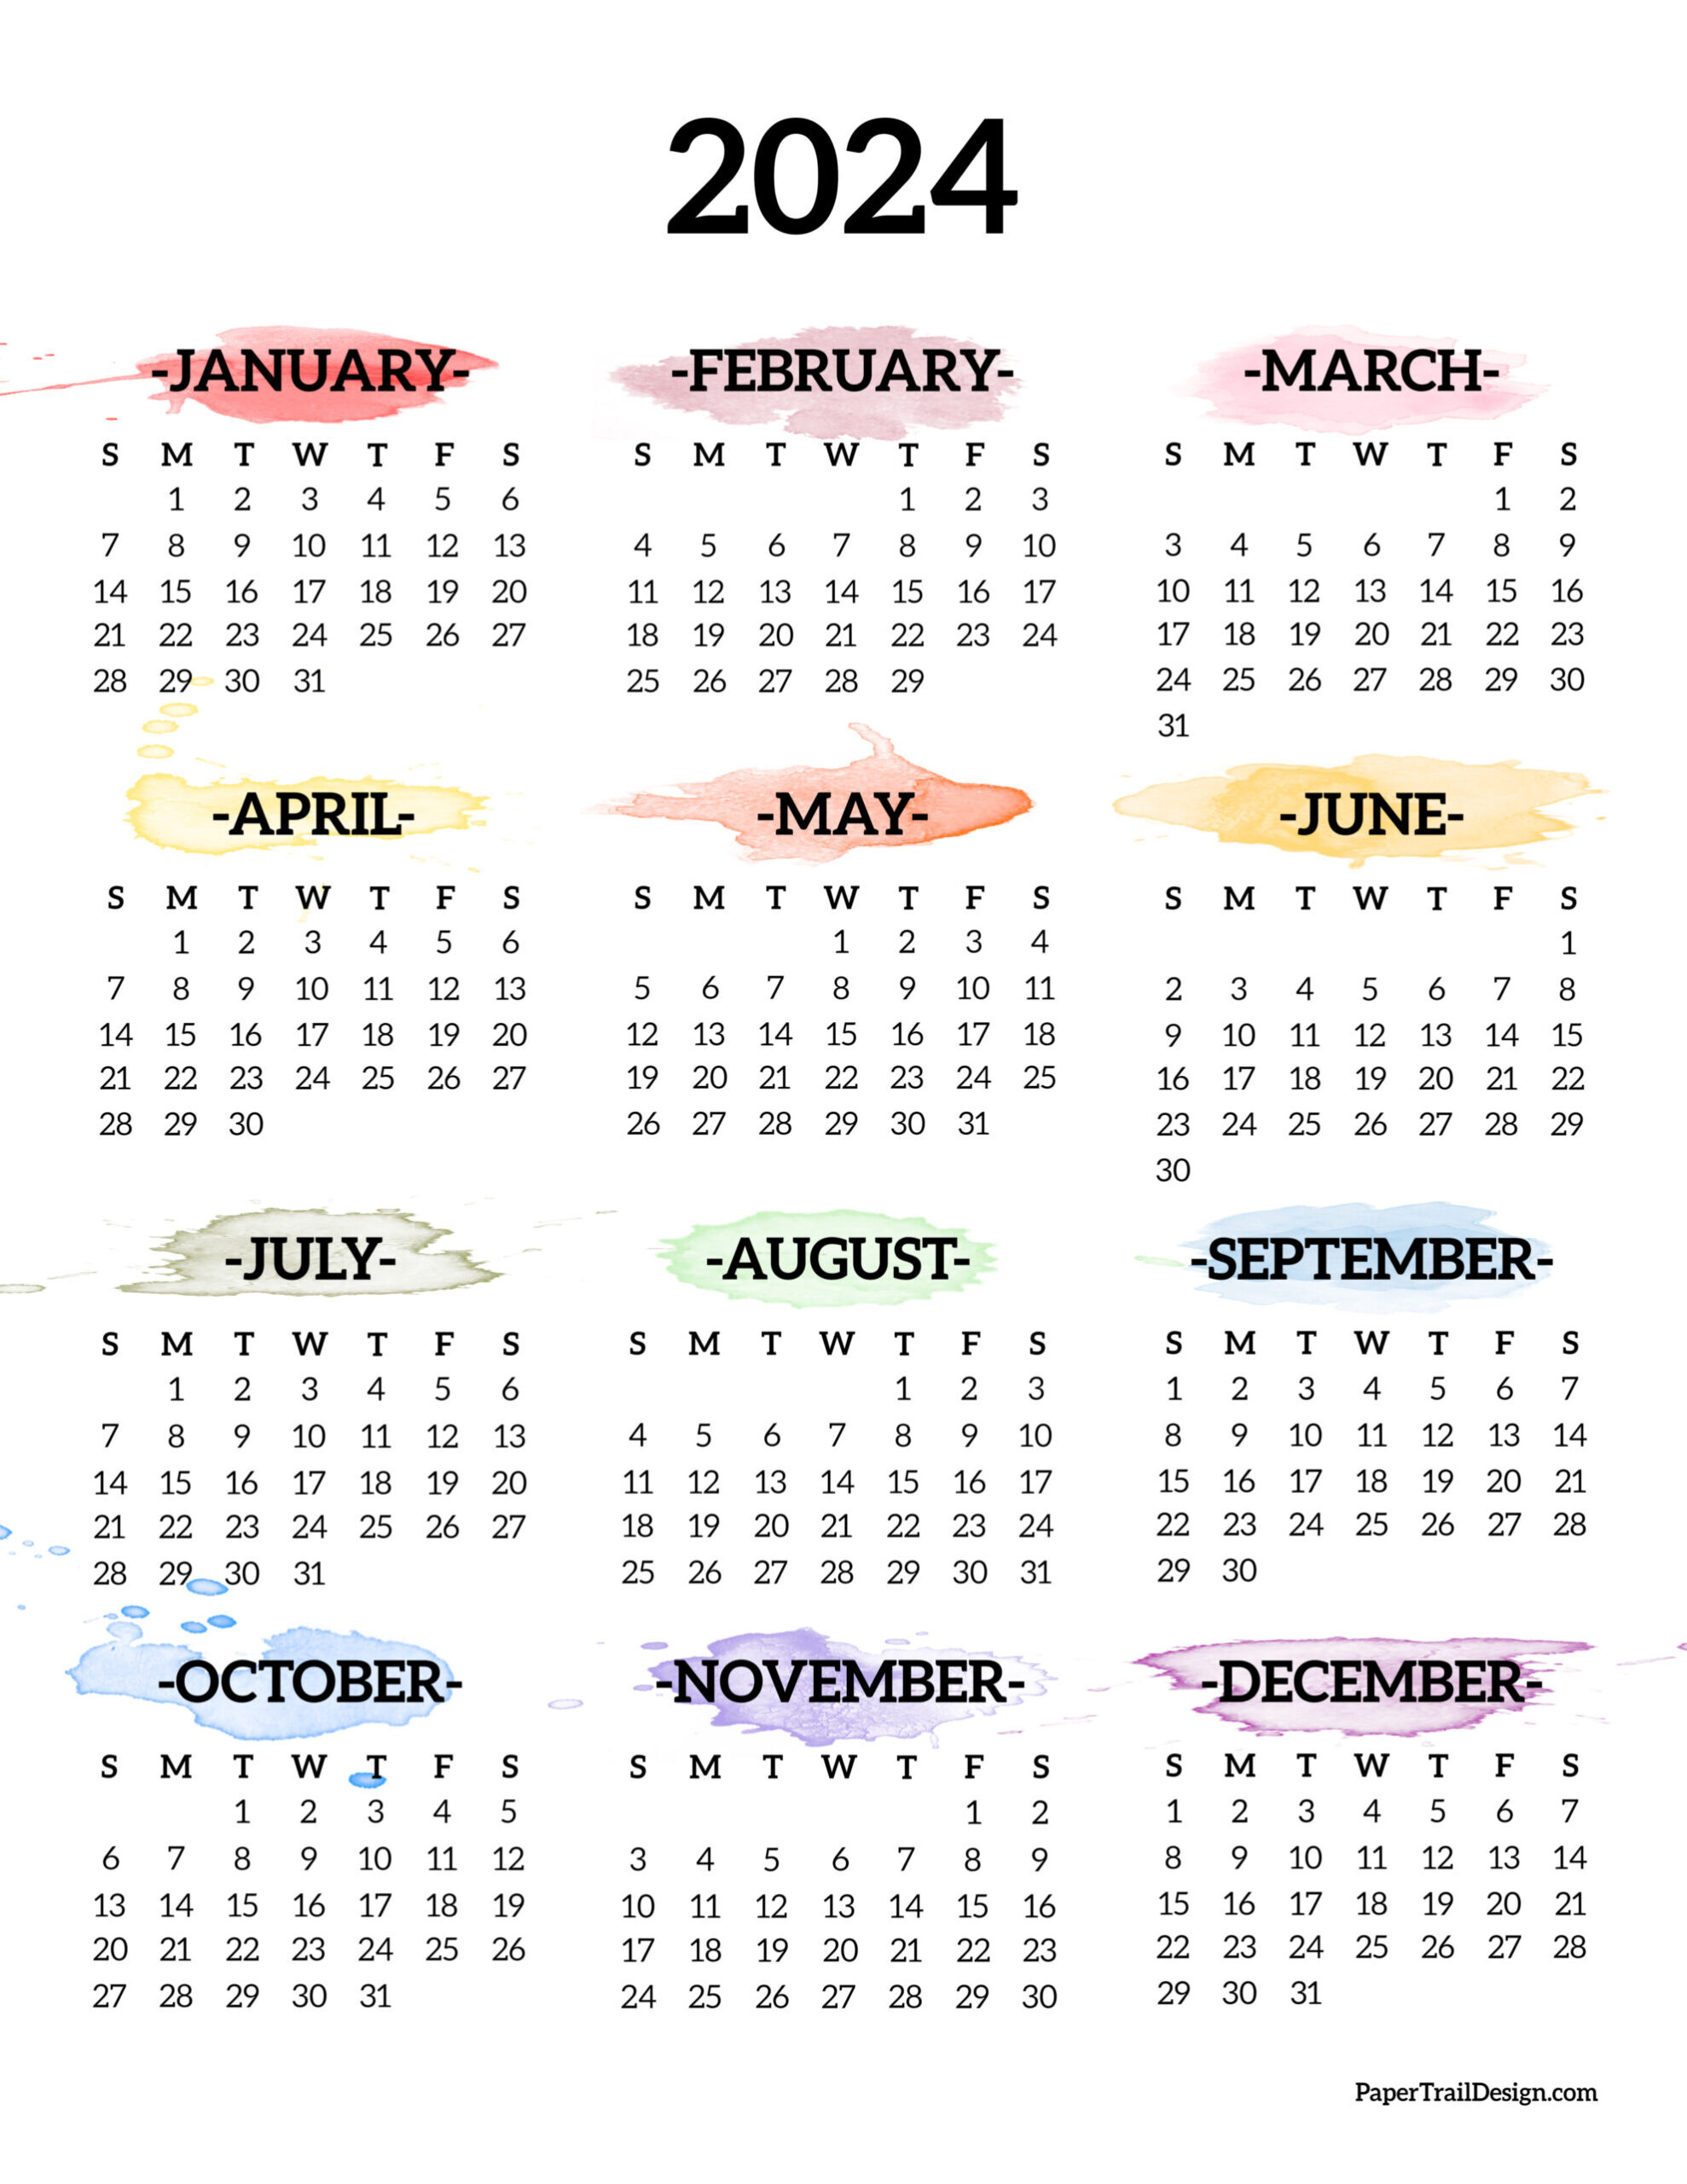 Calendar 2024 Printable One Page - Paper Trail Design for 2024 Printable Calendar 1 Page